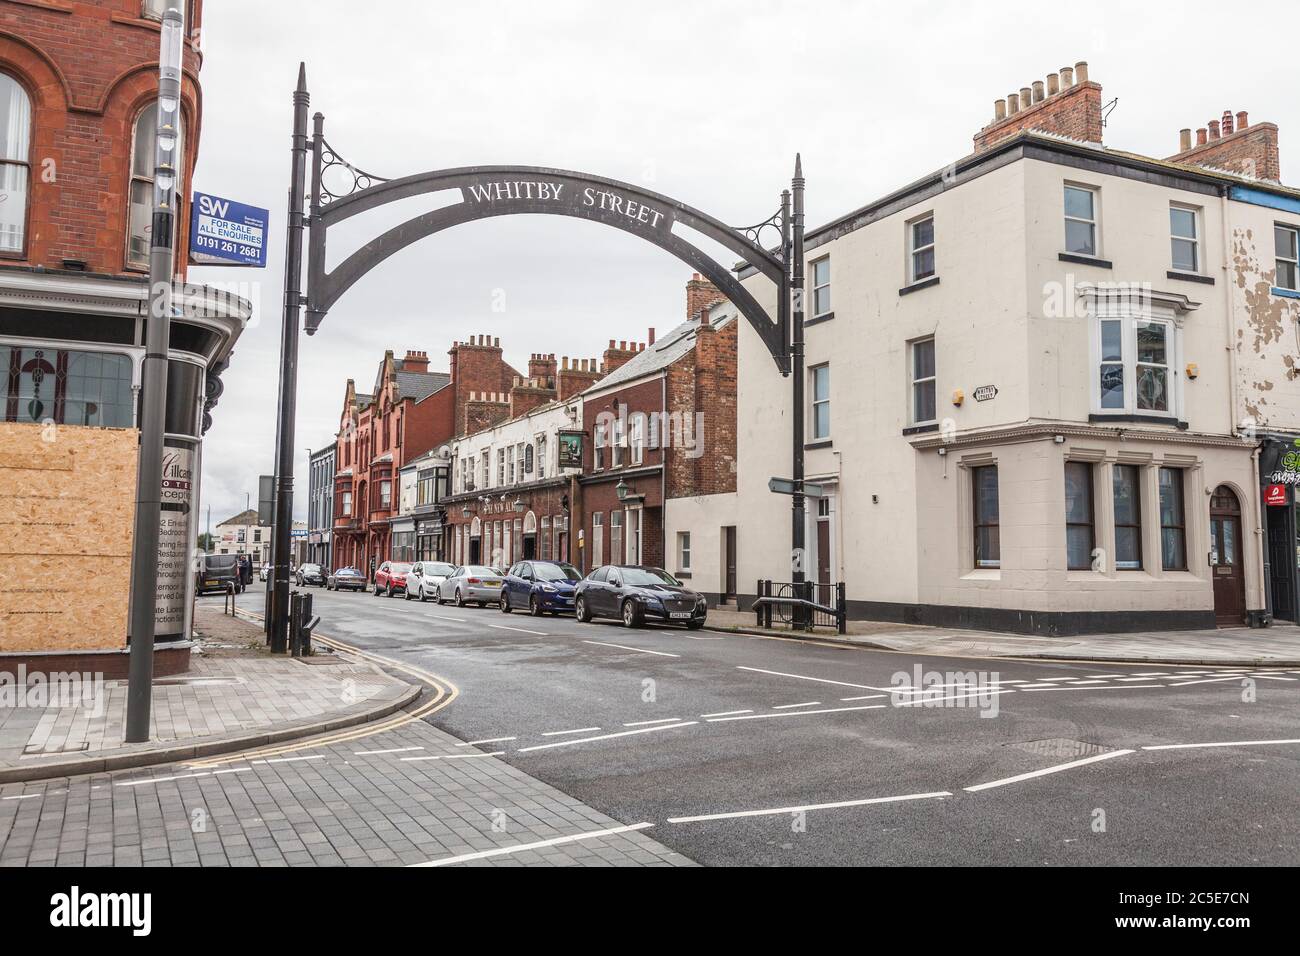 The ornate street sign above Whitby Street in Hartlepool, England, UK Stock Photo